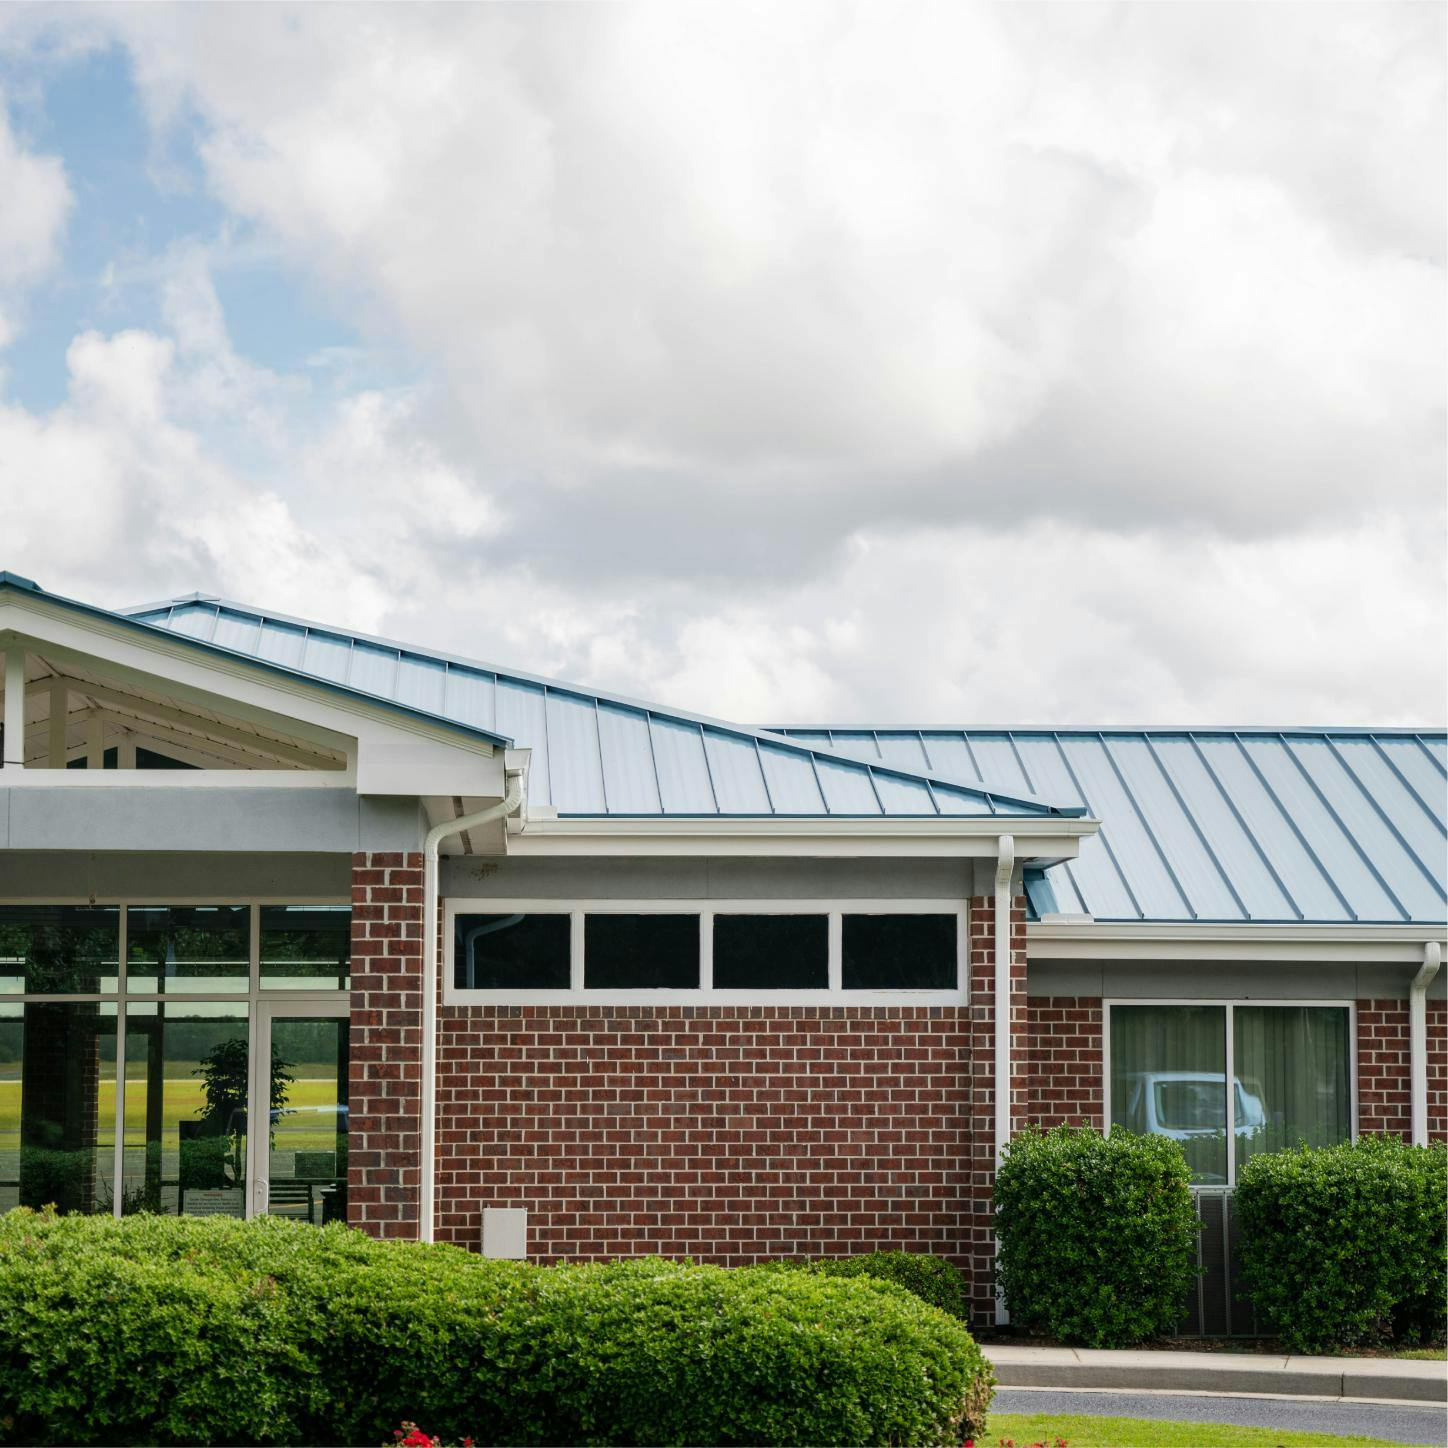 Statesboro-Bulloch County Airport | Commercial Roof Replacement | Bulloch County Commercial Roofers | Standing Seam Metal Roofing | Blue Roof | Commercial Metal Roof